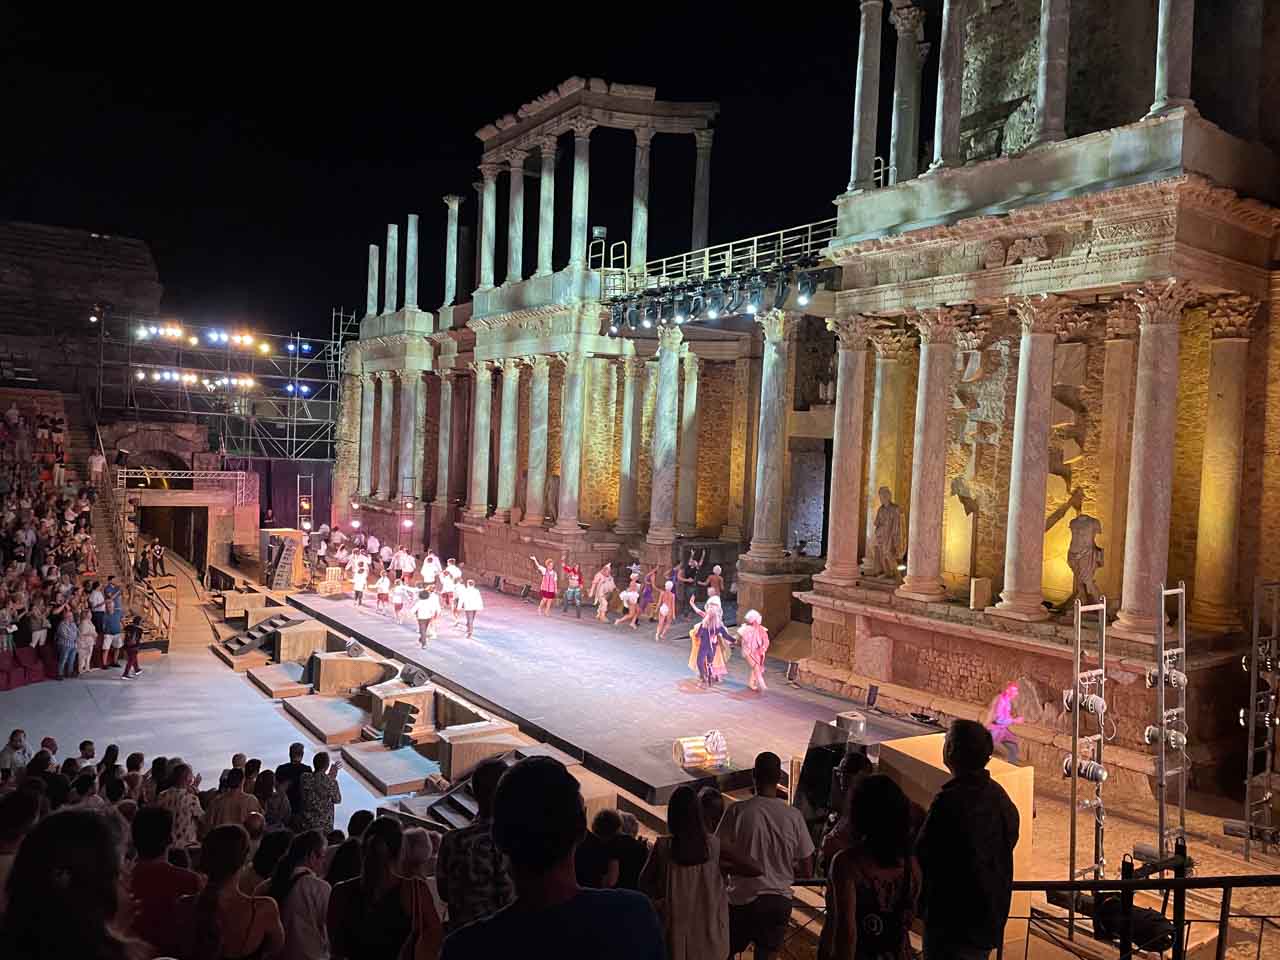 People standing and clapping the actors on the stage of a Roman theatre. The photo is taken at night with the stage lit up.